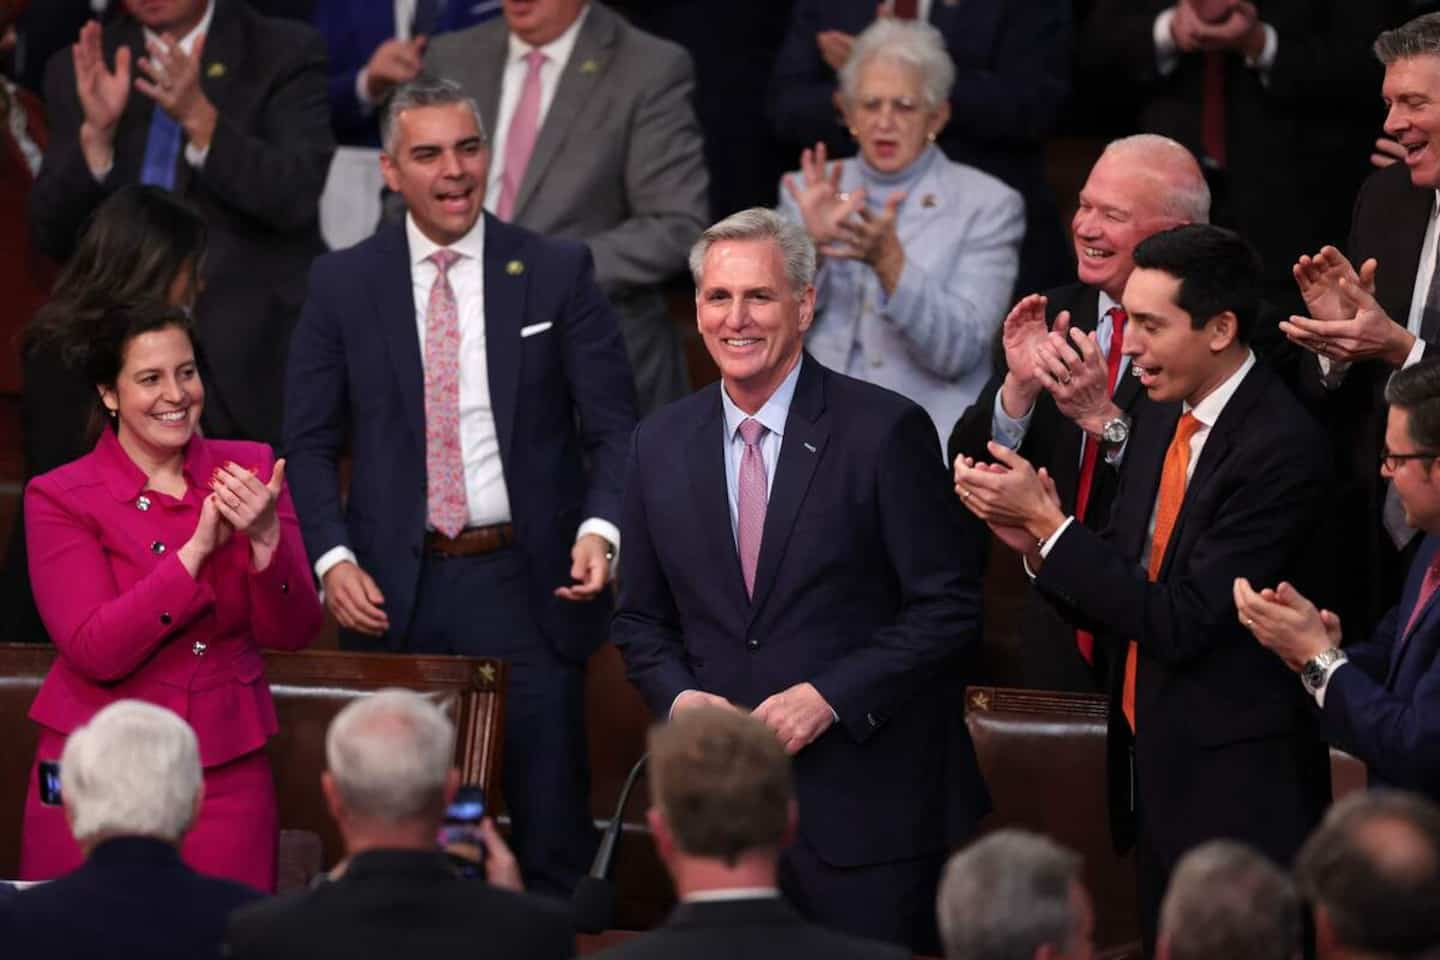 Kevin McCarthy finally becomes Speaker of the US House of Representatives